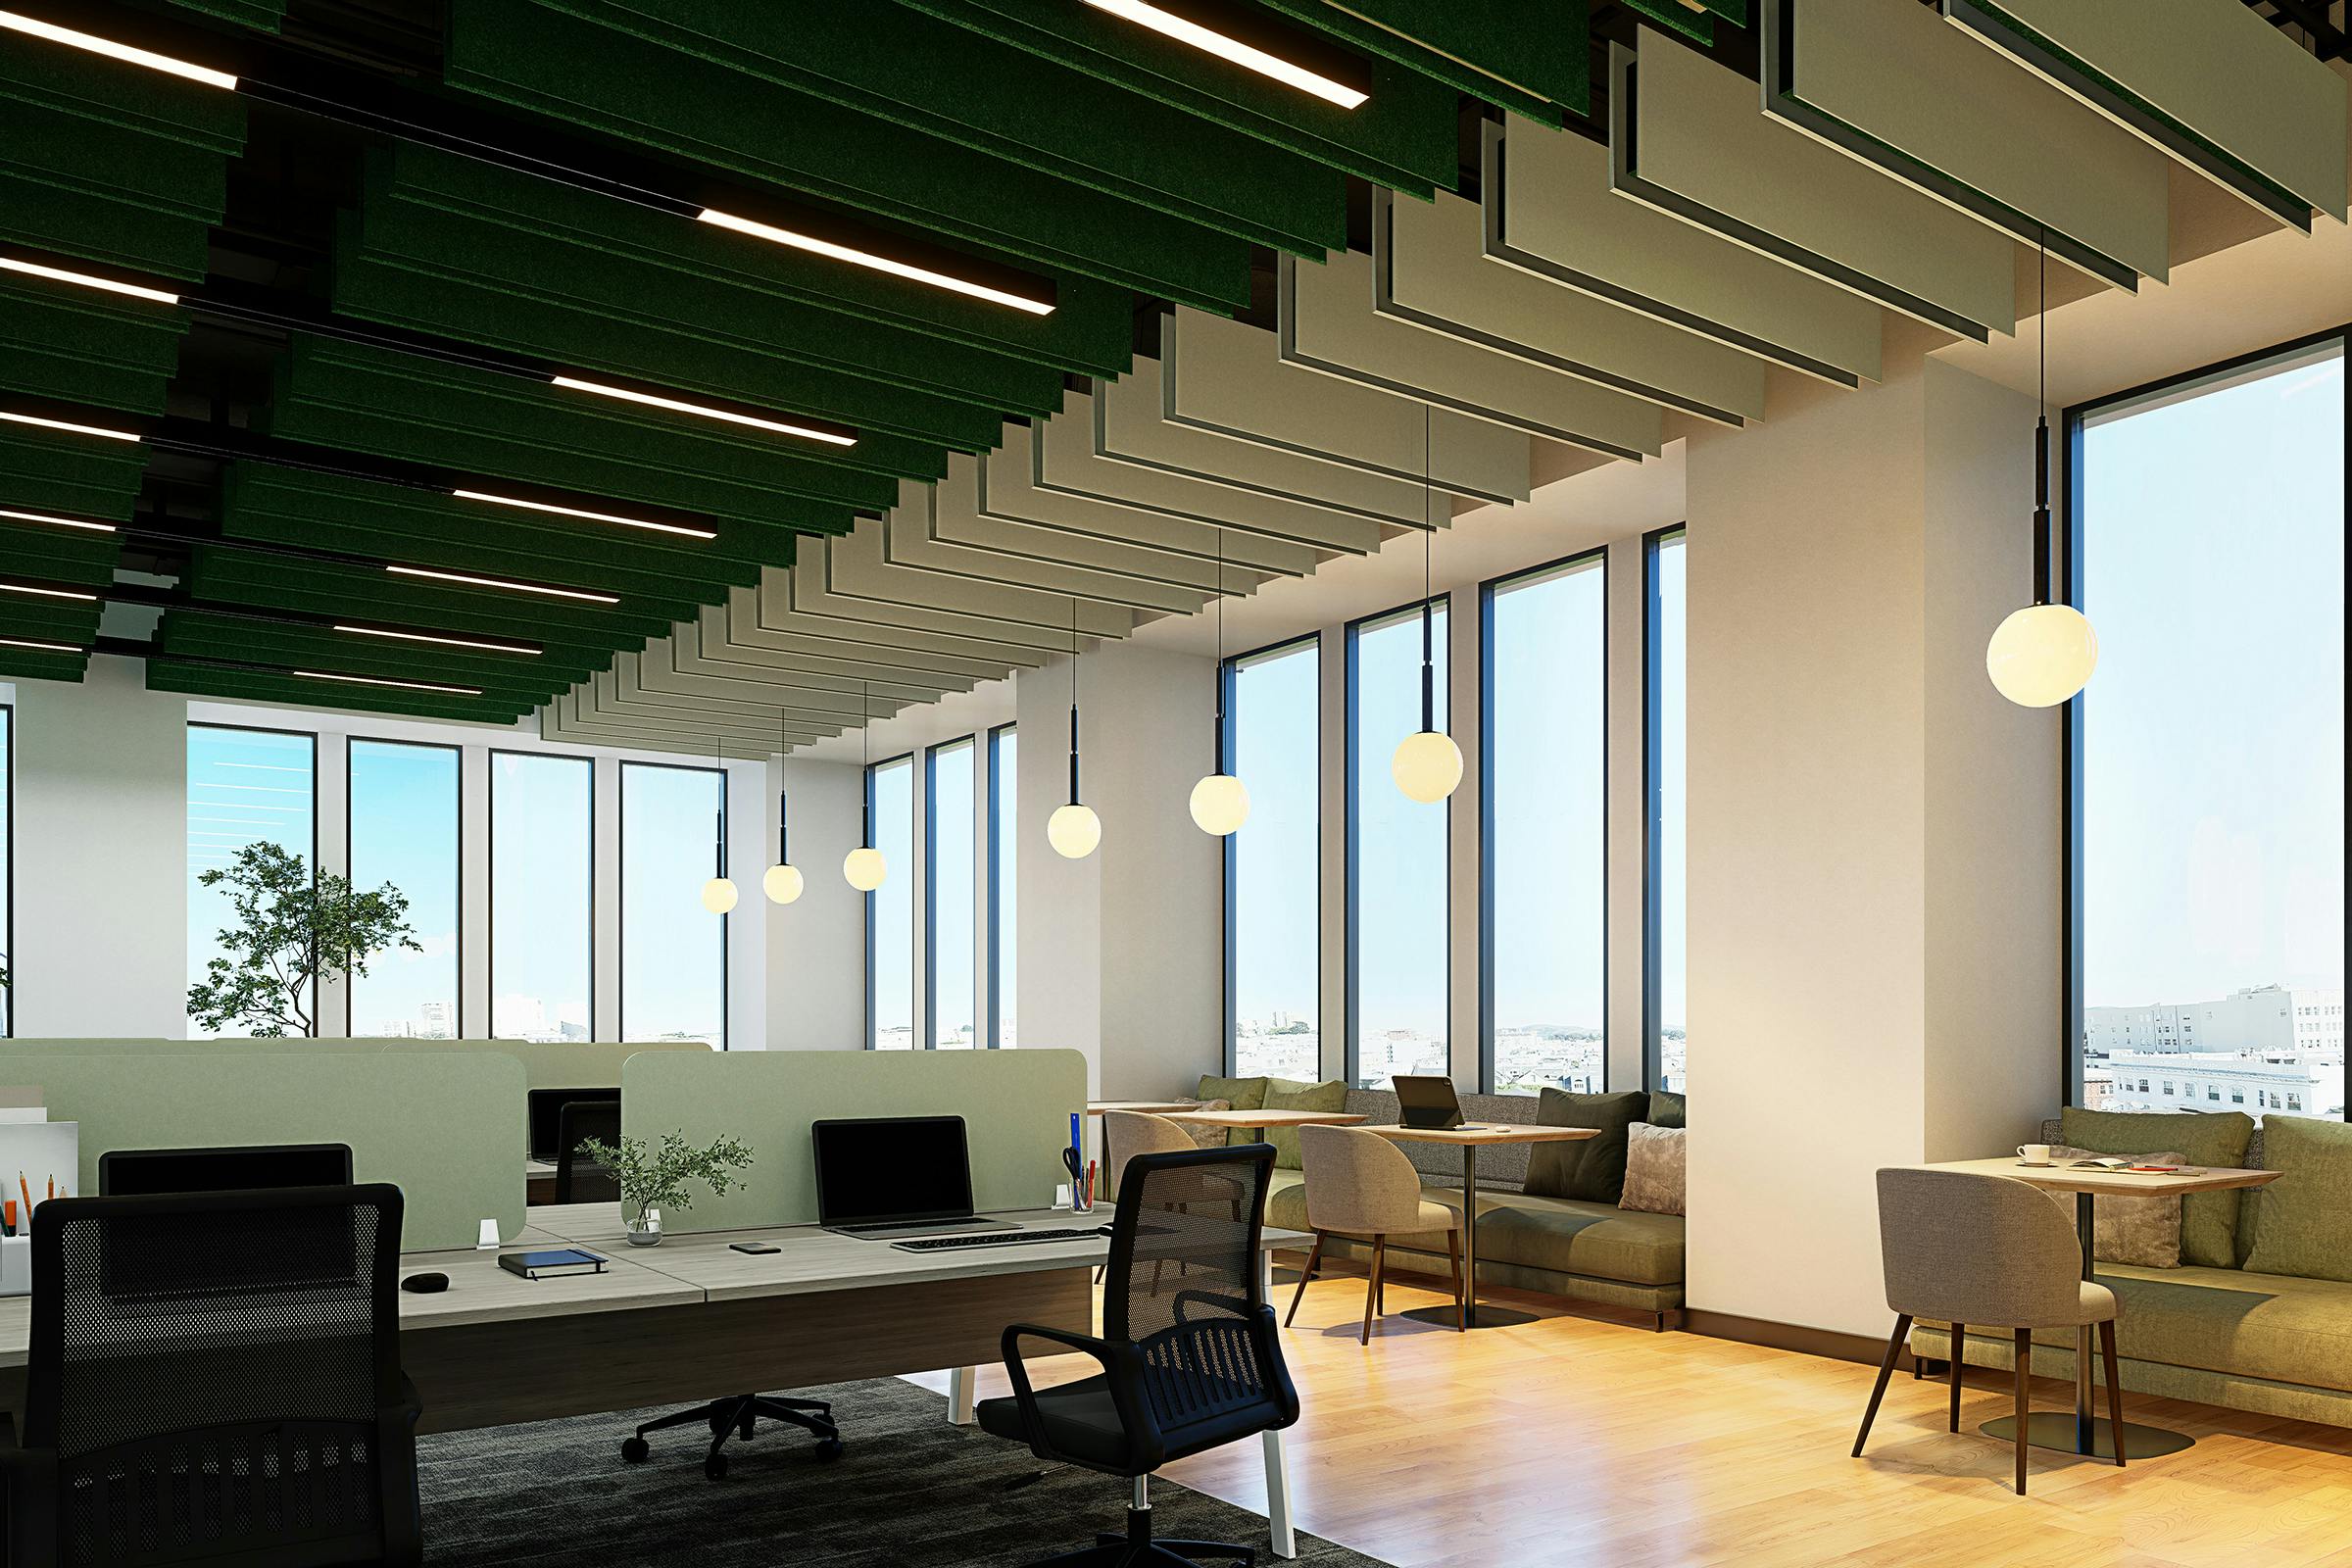 Modern office space boasting sleek design with hanging orb lighting, expansive windows offering ample natural light, and a stylish blend of workstations and casual seating areas under an artistic ceiling layout.